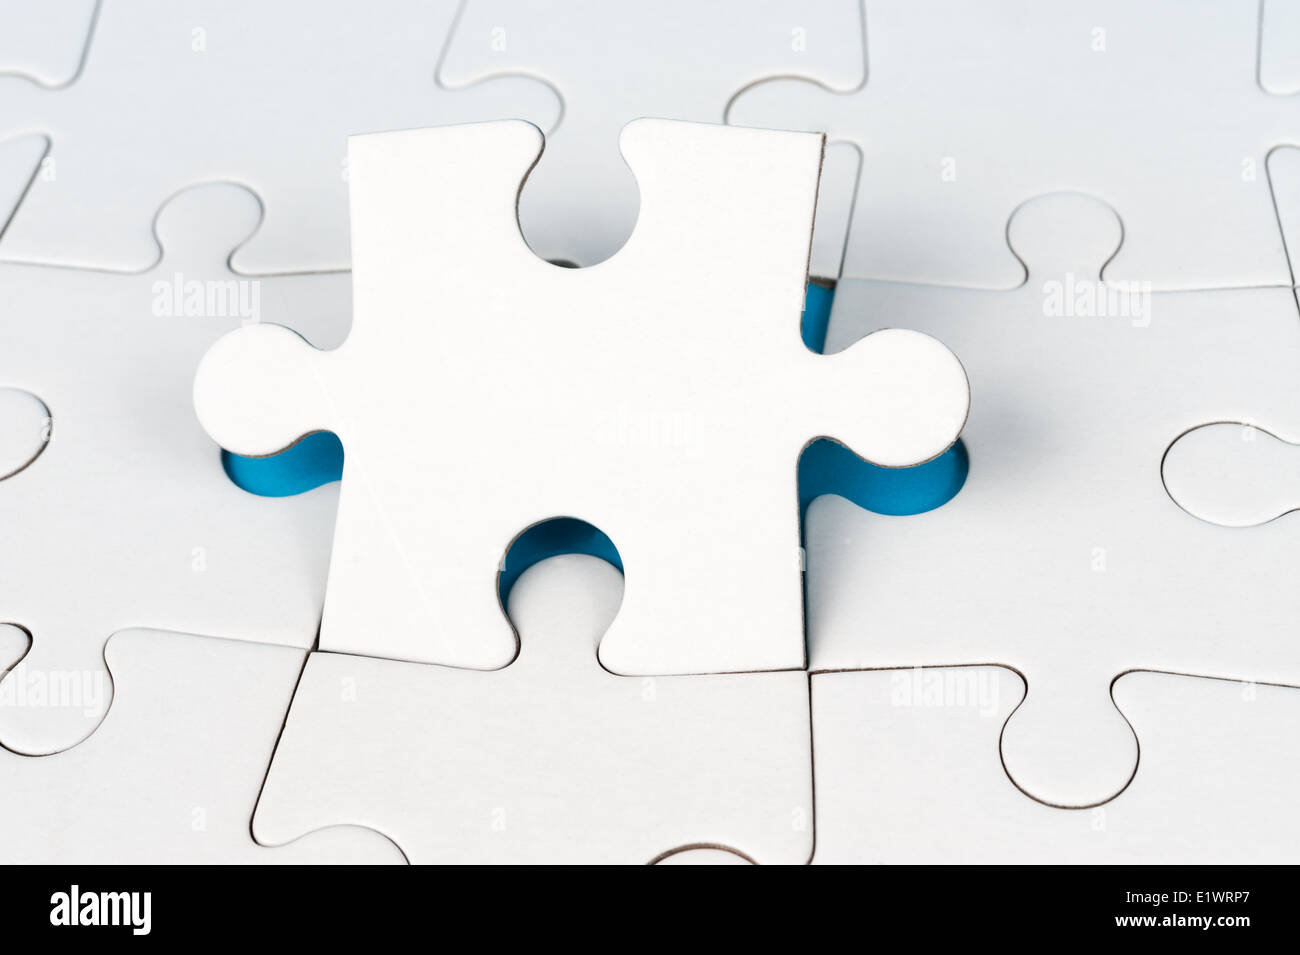 Group of white paper jigsaw puzzles Stock Photo